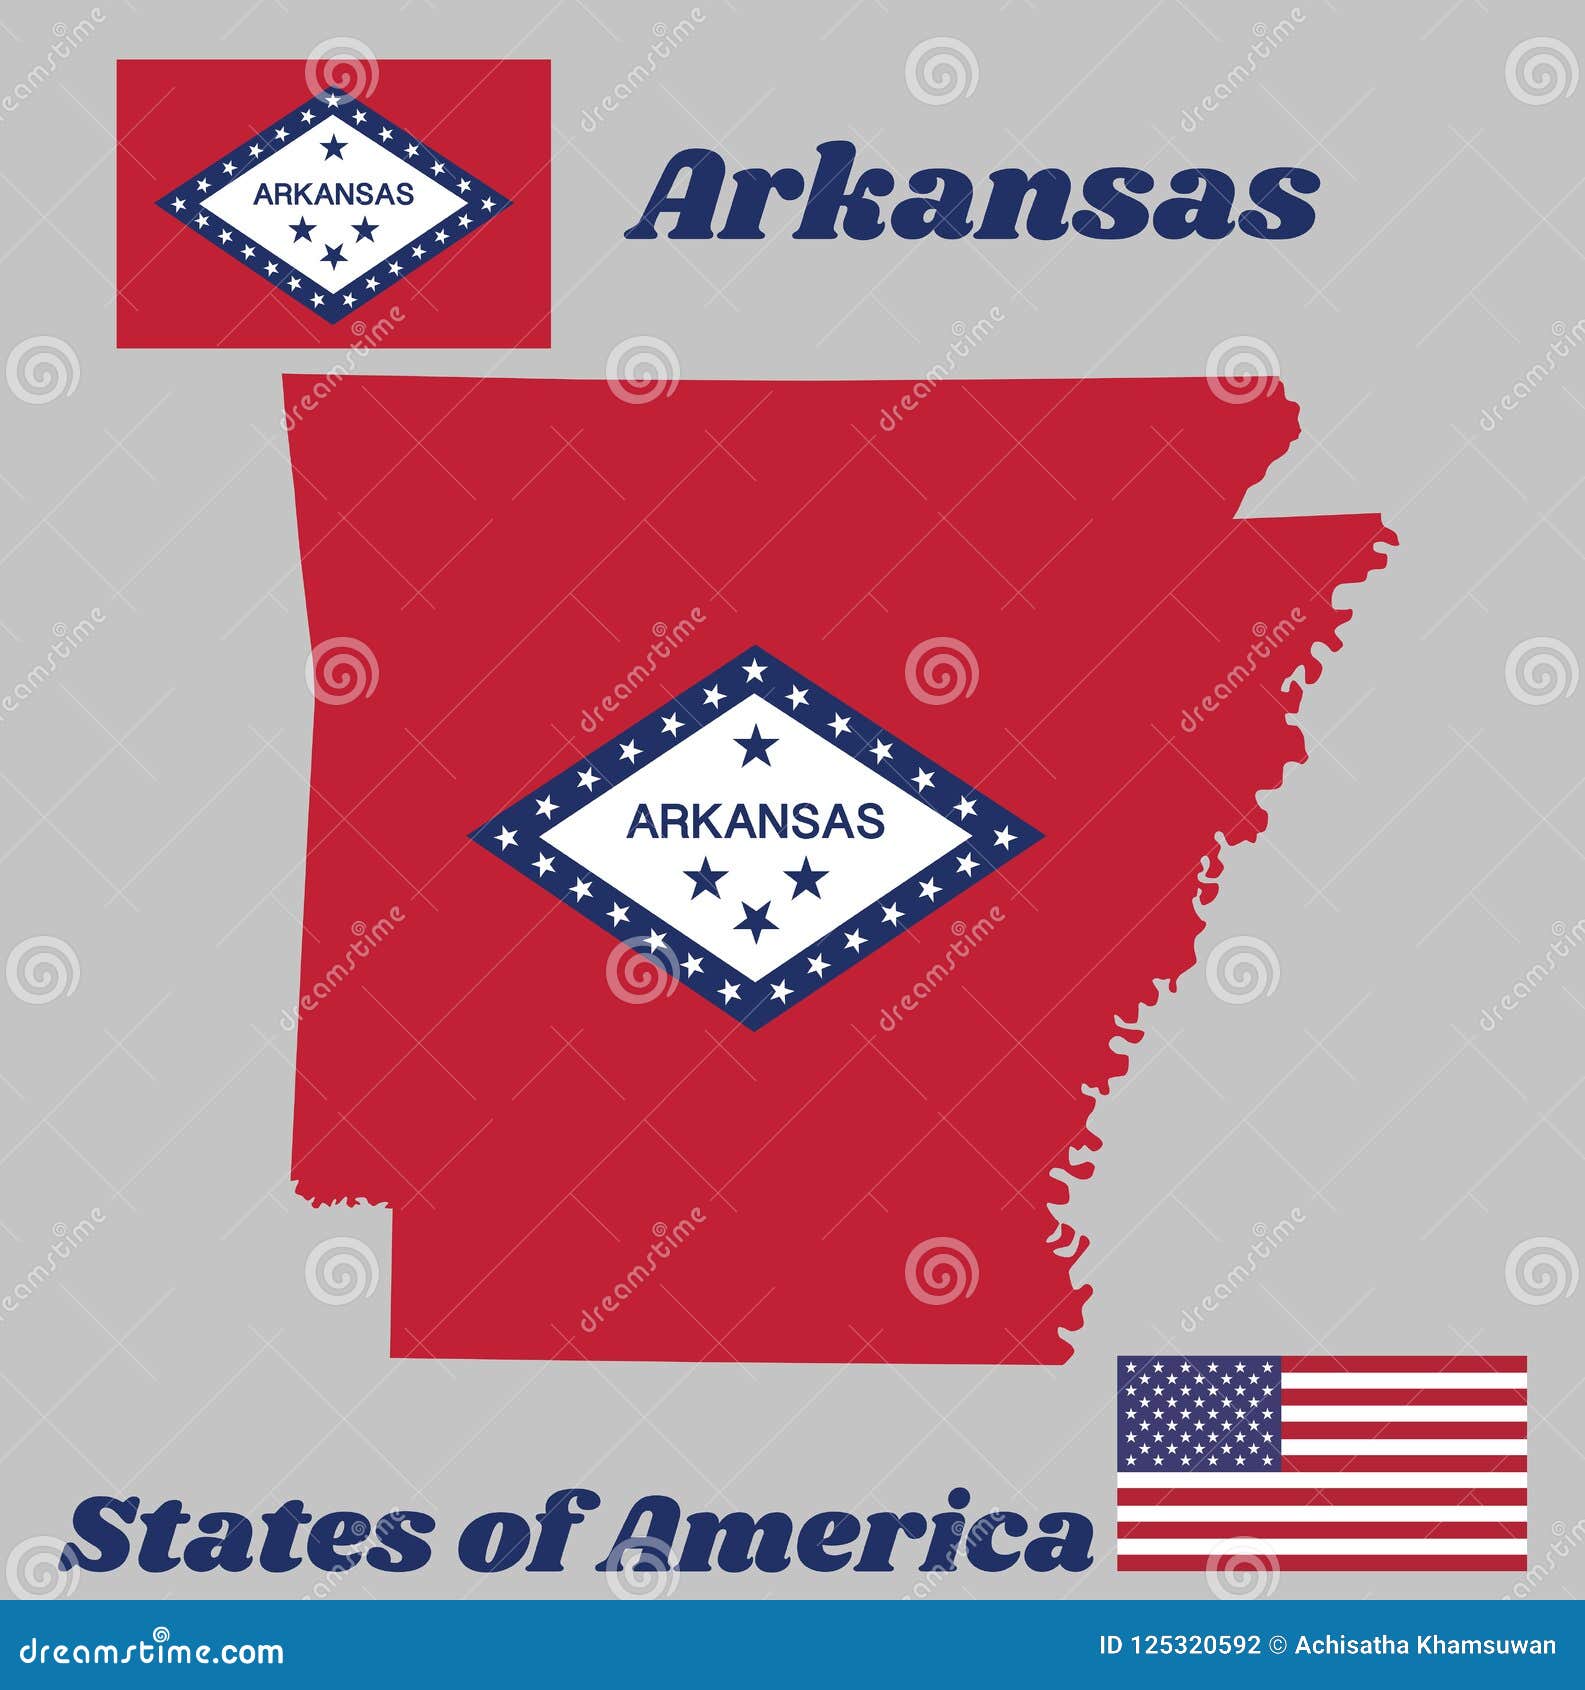 Map Outline And Flag Of Arkansas A Rectangular Field Of Red A Large White Diamond Bordered By